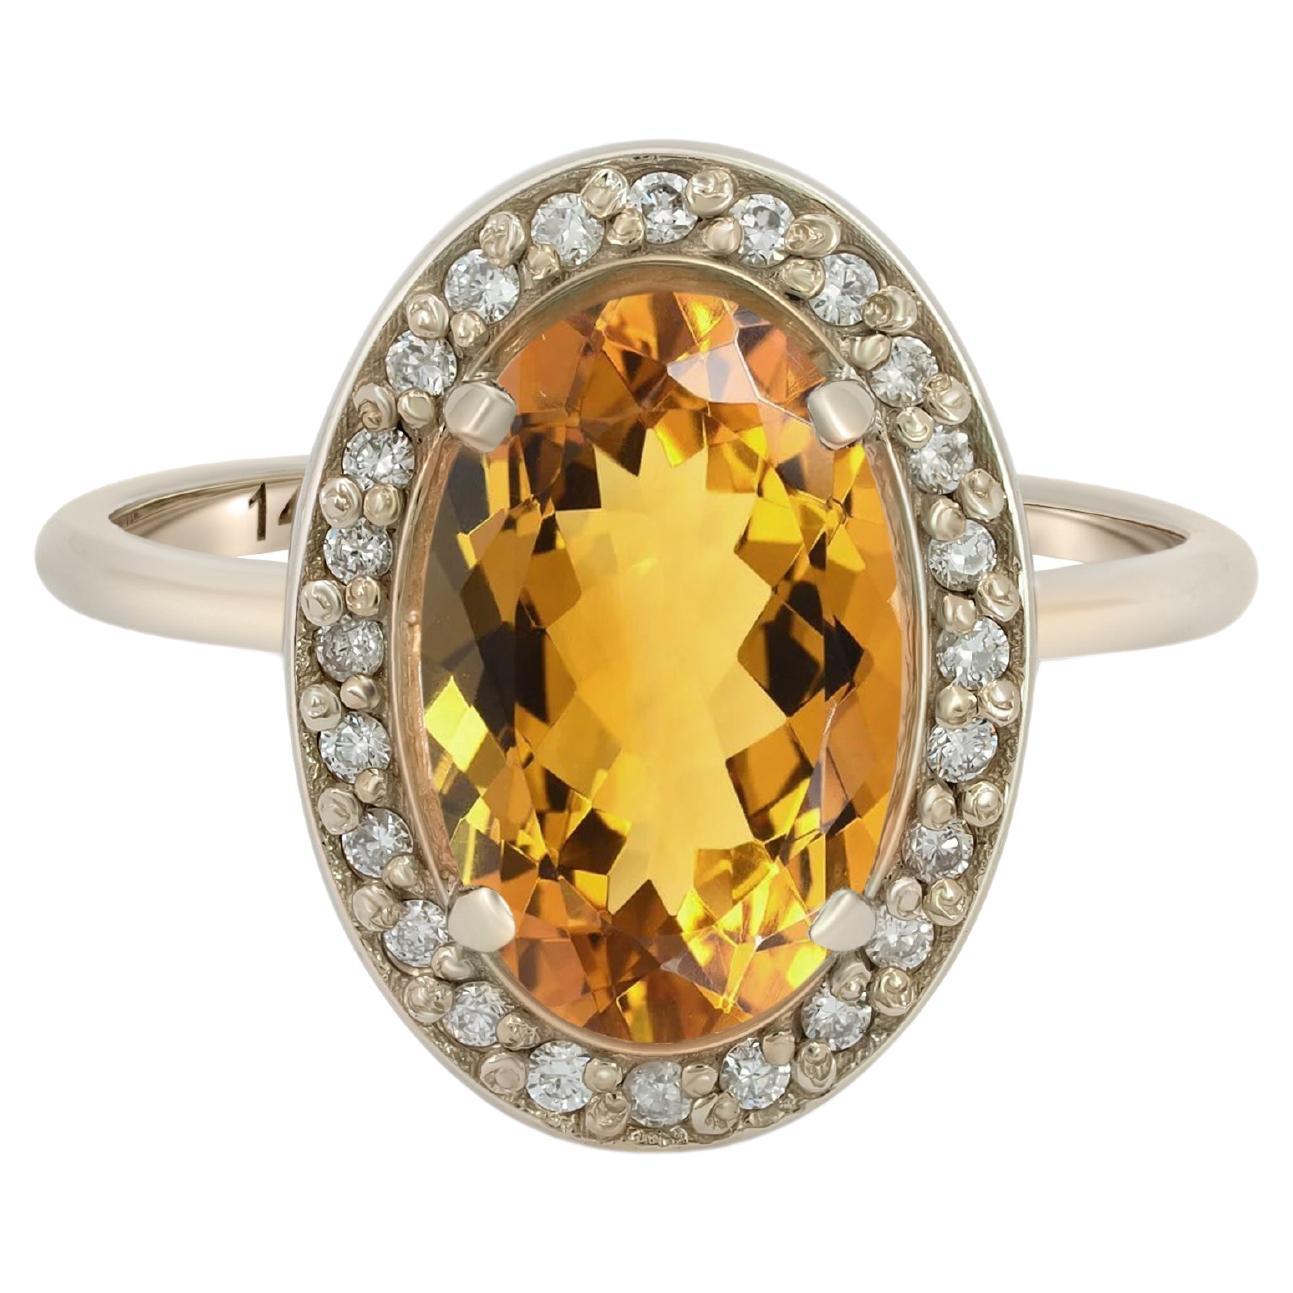 For Sale:  Citrine and diamonds 14k gold ring